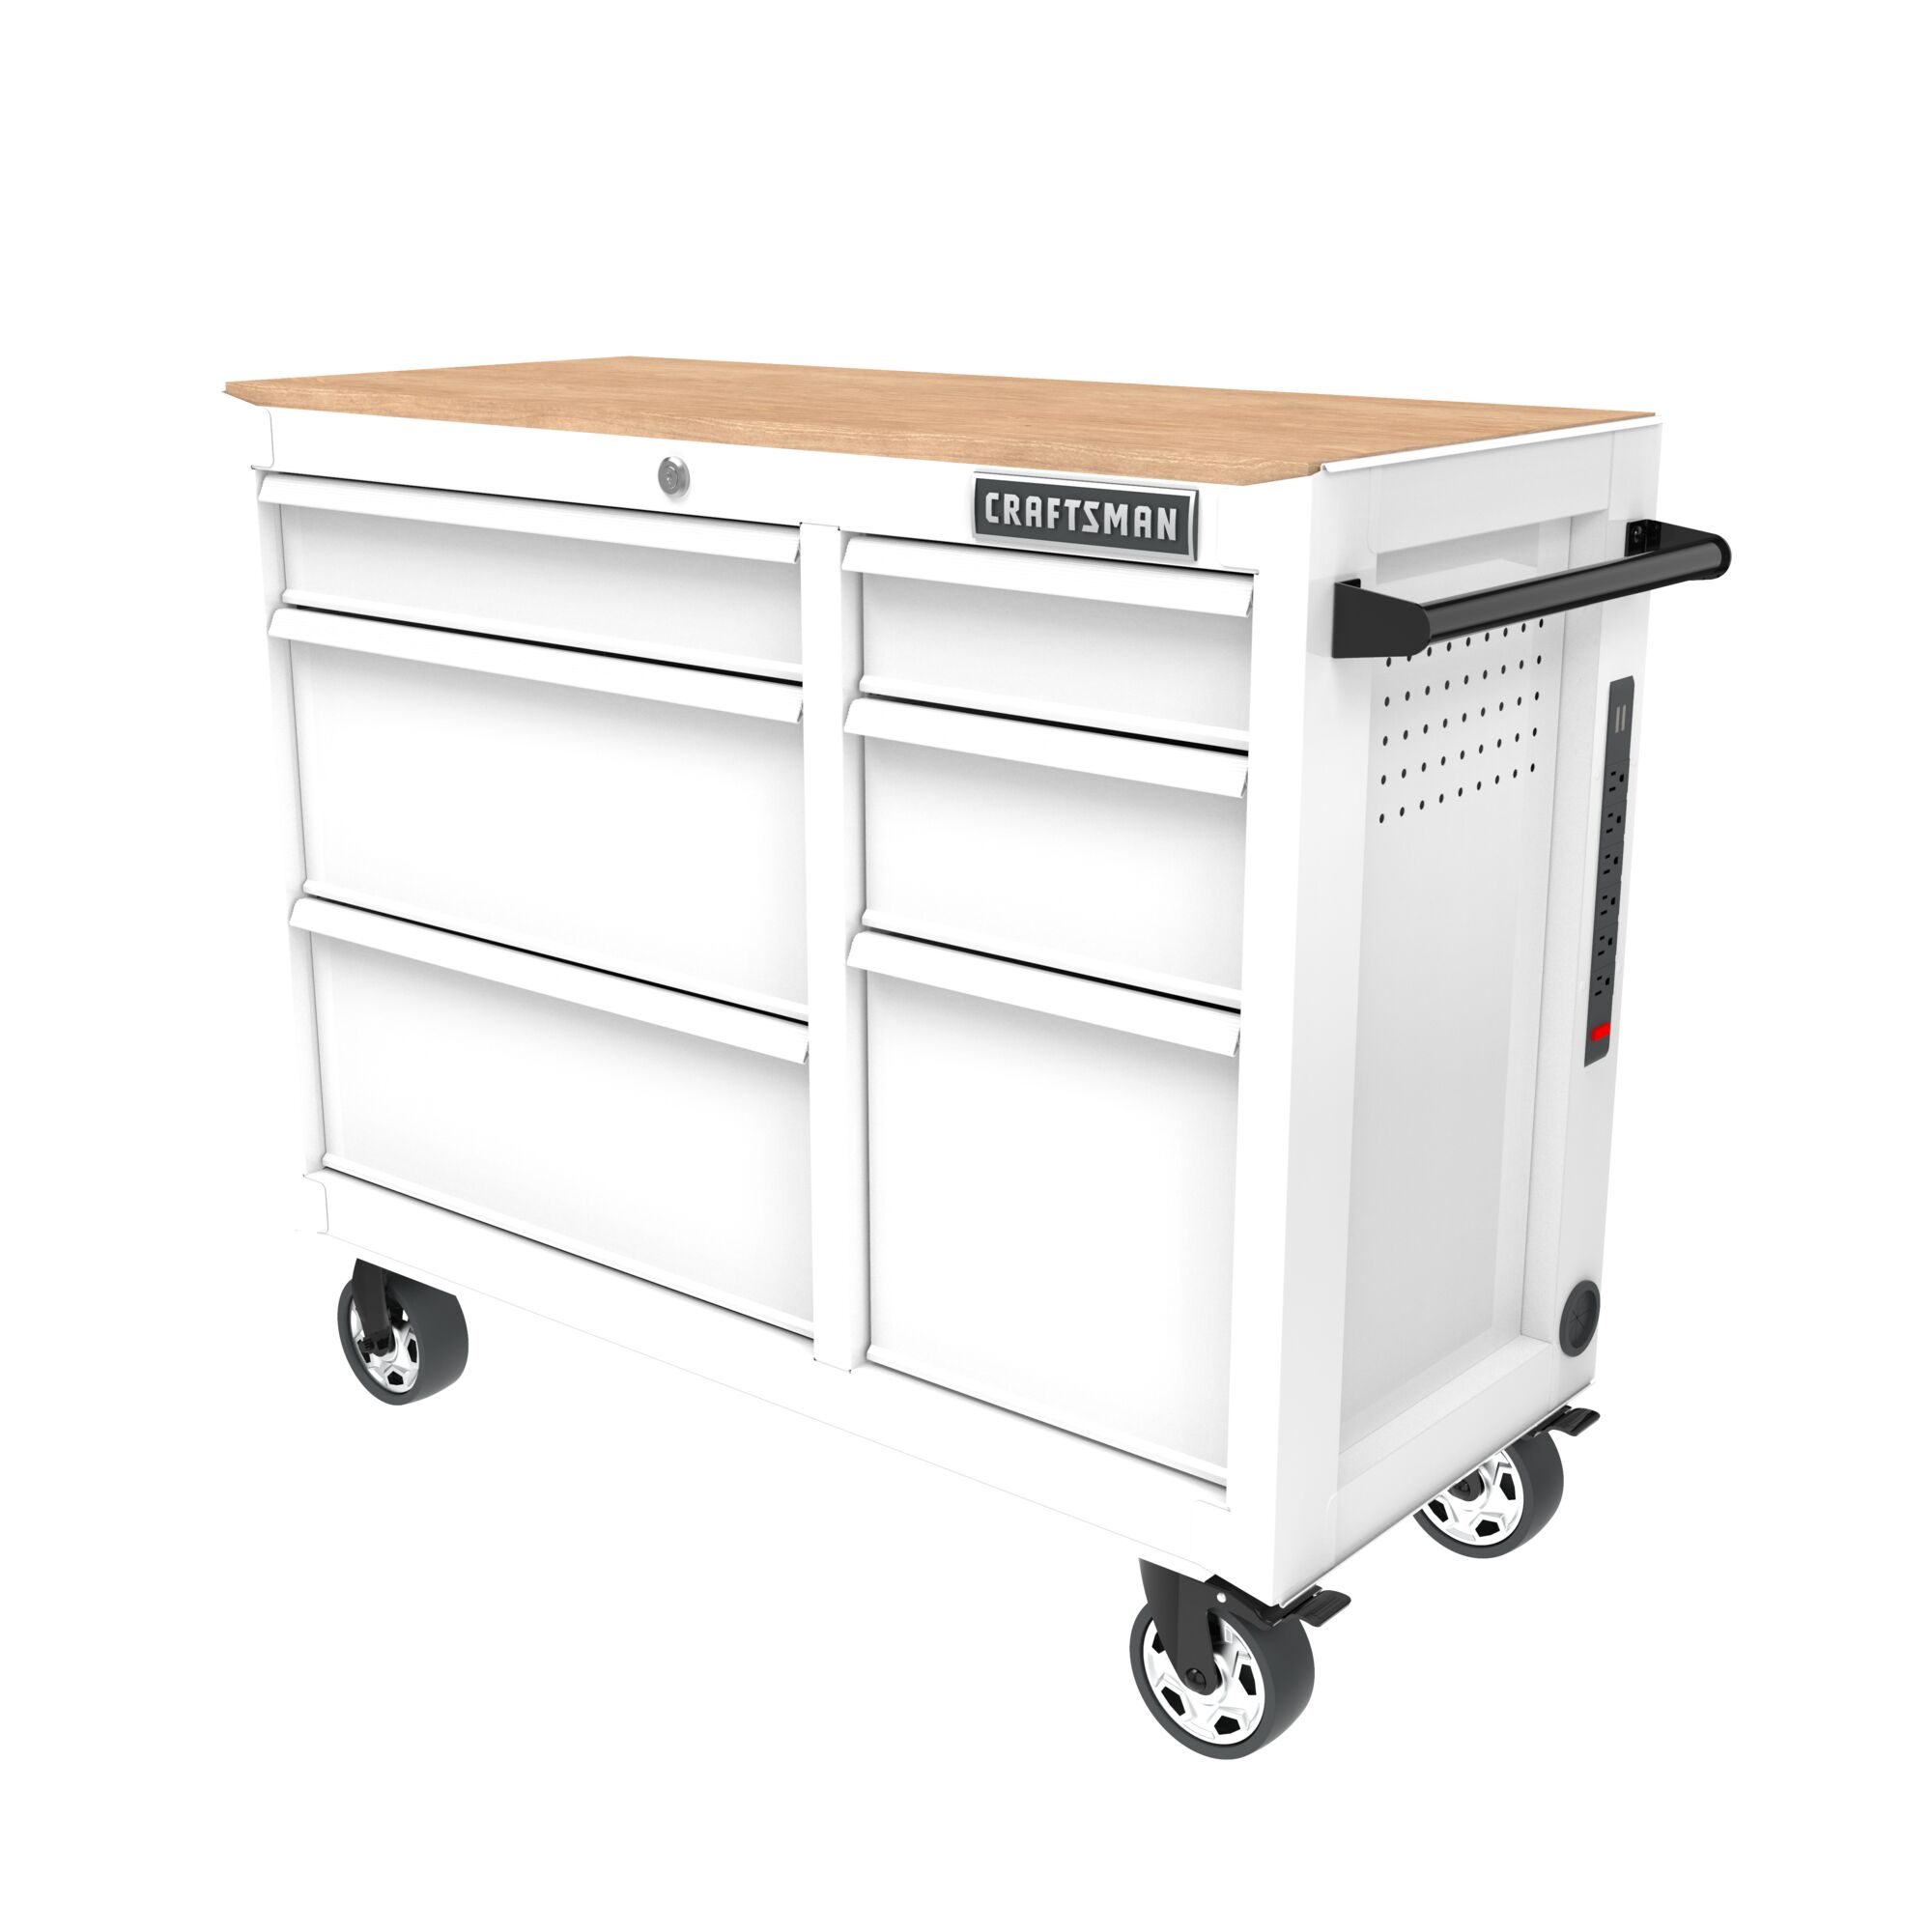 All-white CRAFTSMAN S2000 Series 41-inch wide 6-drawer workstation with wood top, at 3/4 turn to left